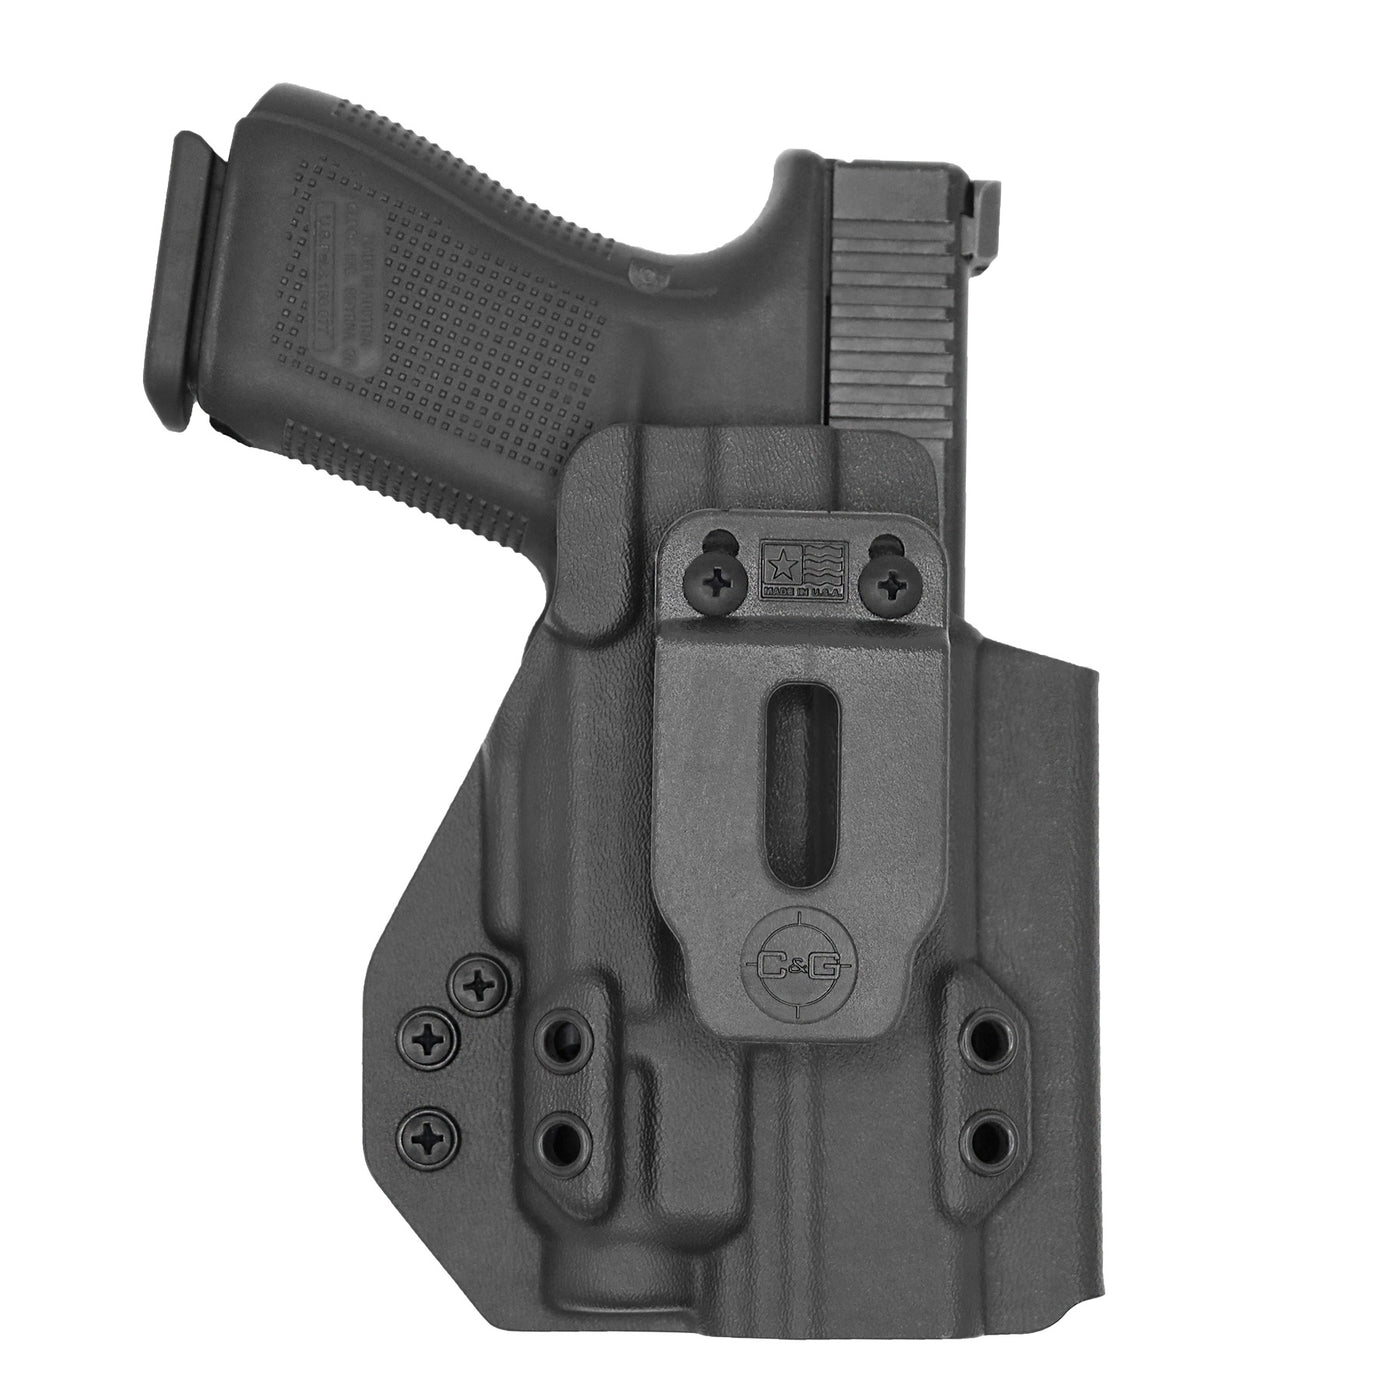 C&G Holsters custom IWB Tactical Poly80 c/v2 Streamlight tlr7/a in holstered position